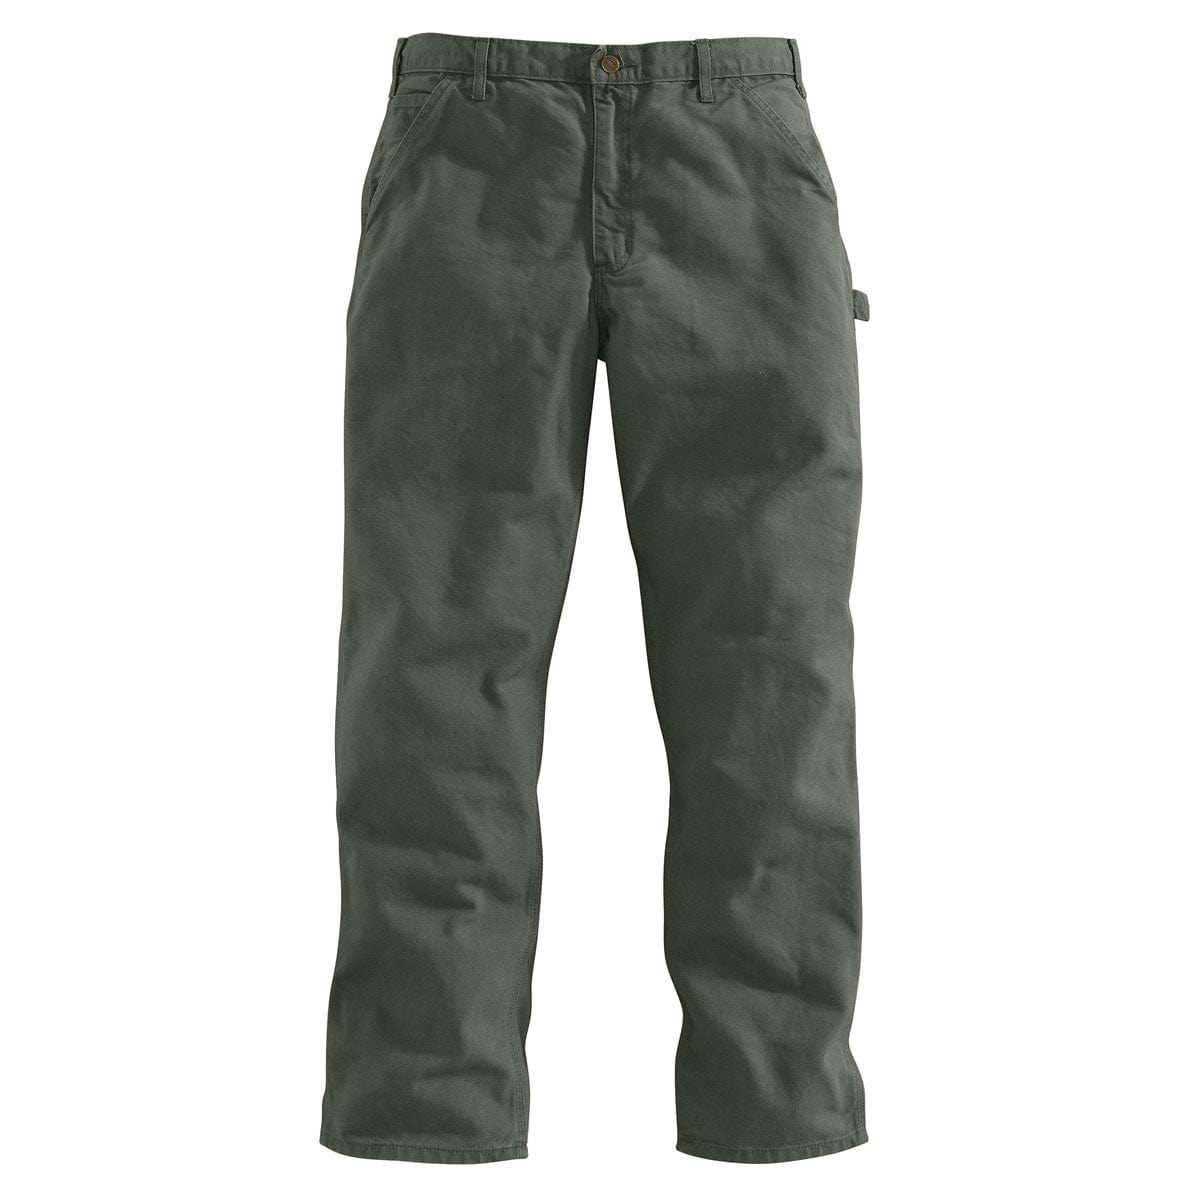 Carhartt Loose Fit Washed Duck Utility Work Pant, Waist Sizes 40